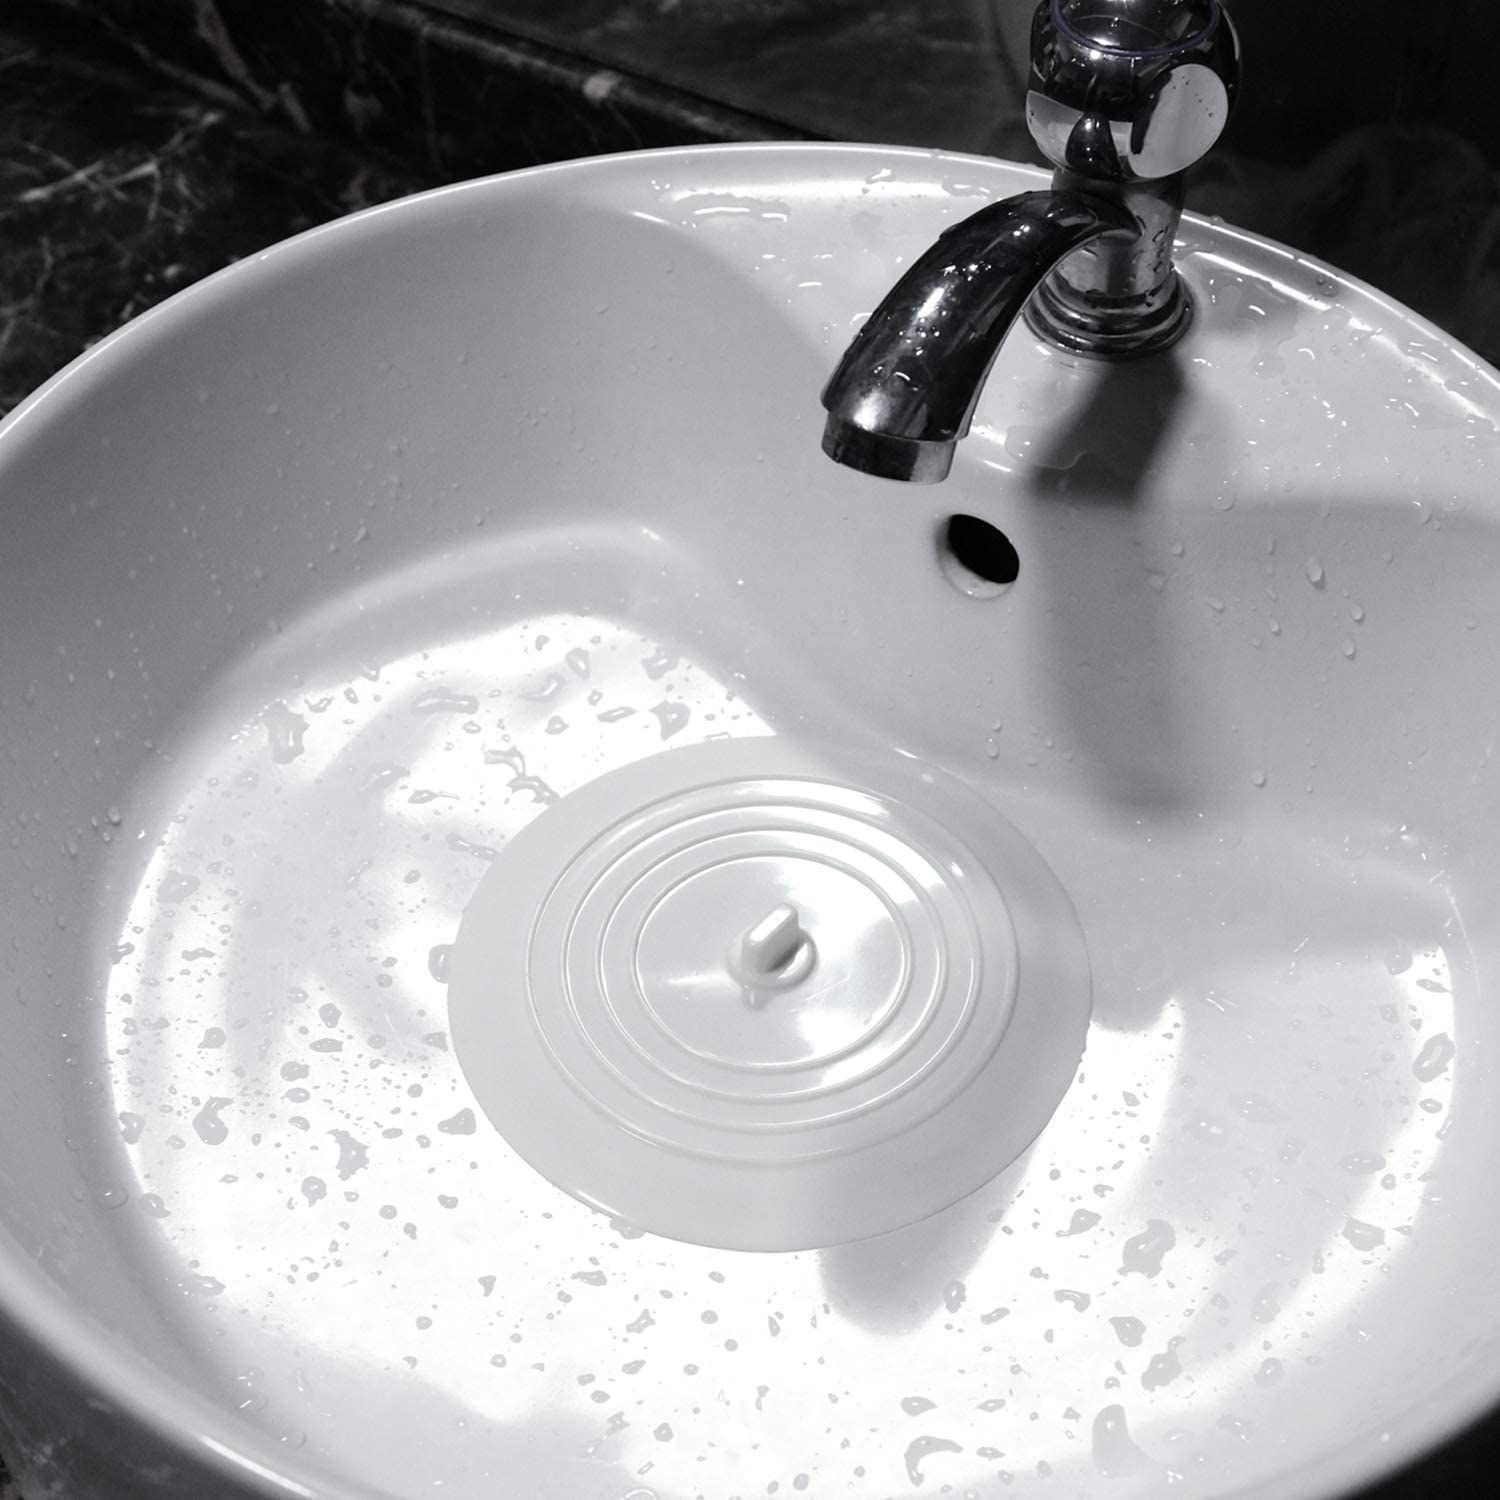 A drain stopper covering a sink drain